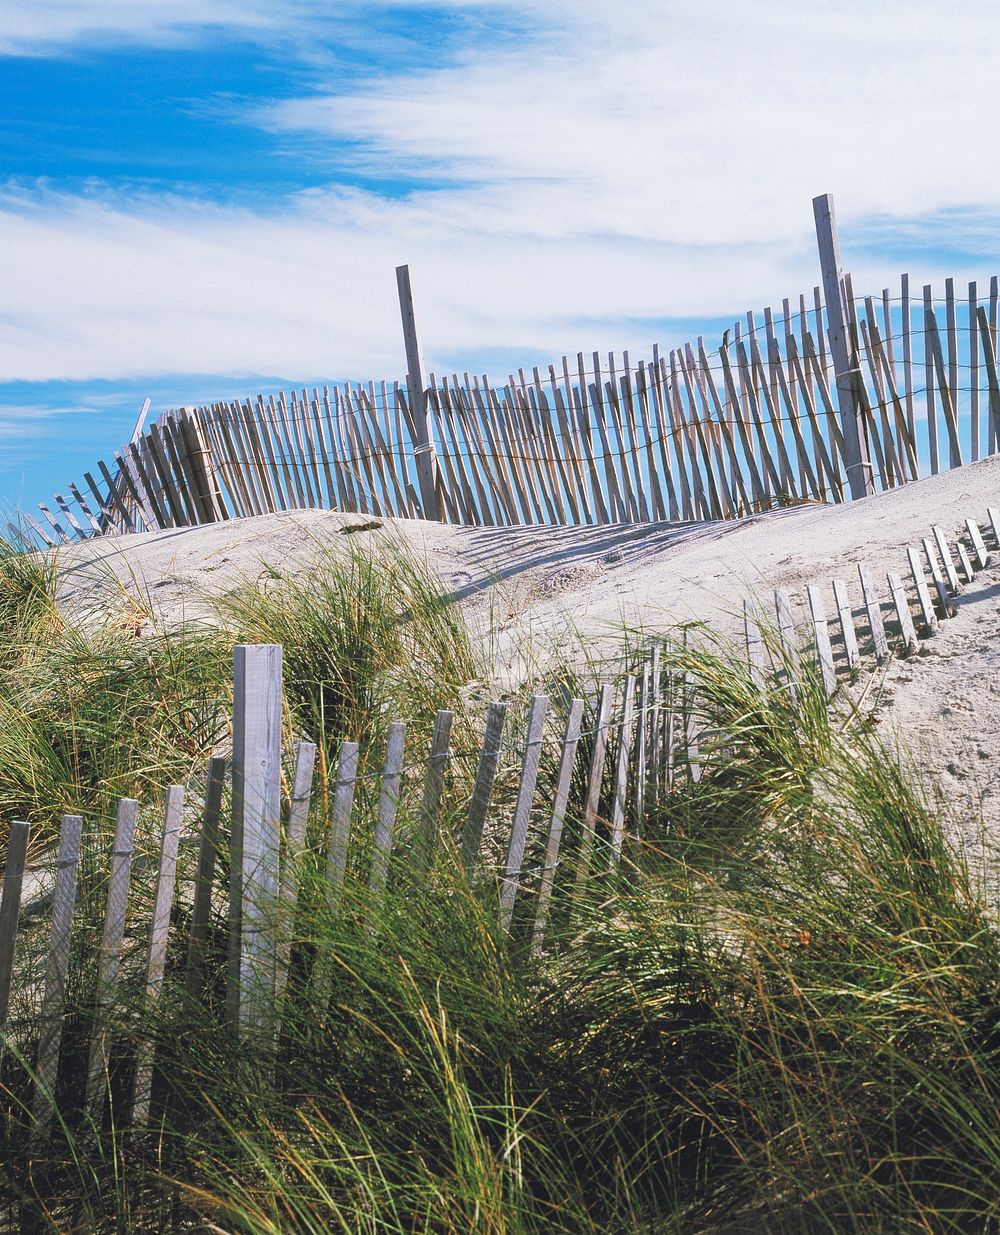 Dunes and Fence, Cape Hatteras, North Carolina. Original image from Carol M. Highsmith&rsquo;s America, Library of Congress…